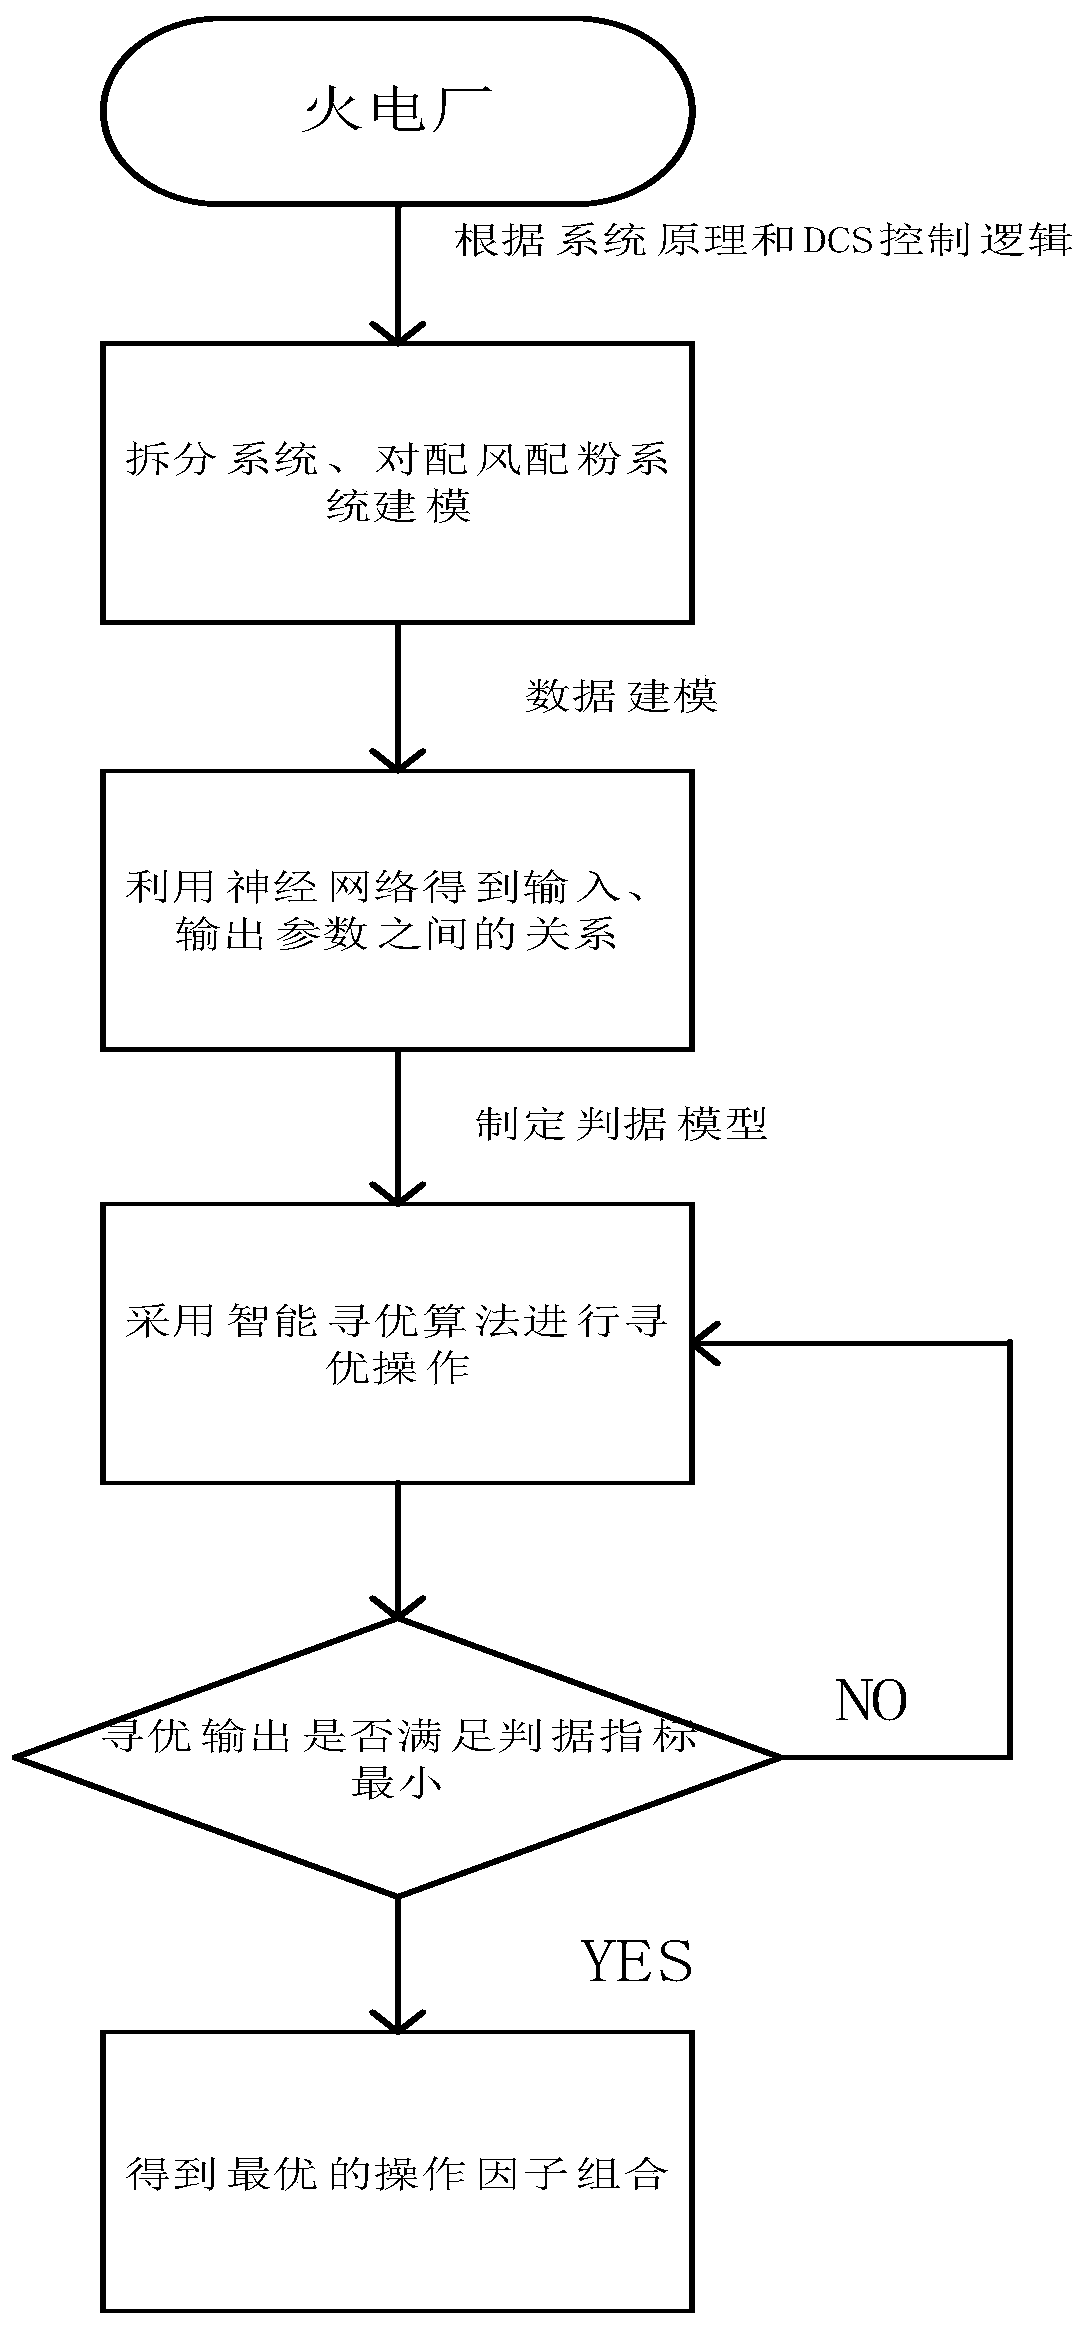 Air distribution control method, system and related equipment of pulverized coal boiler